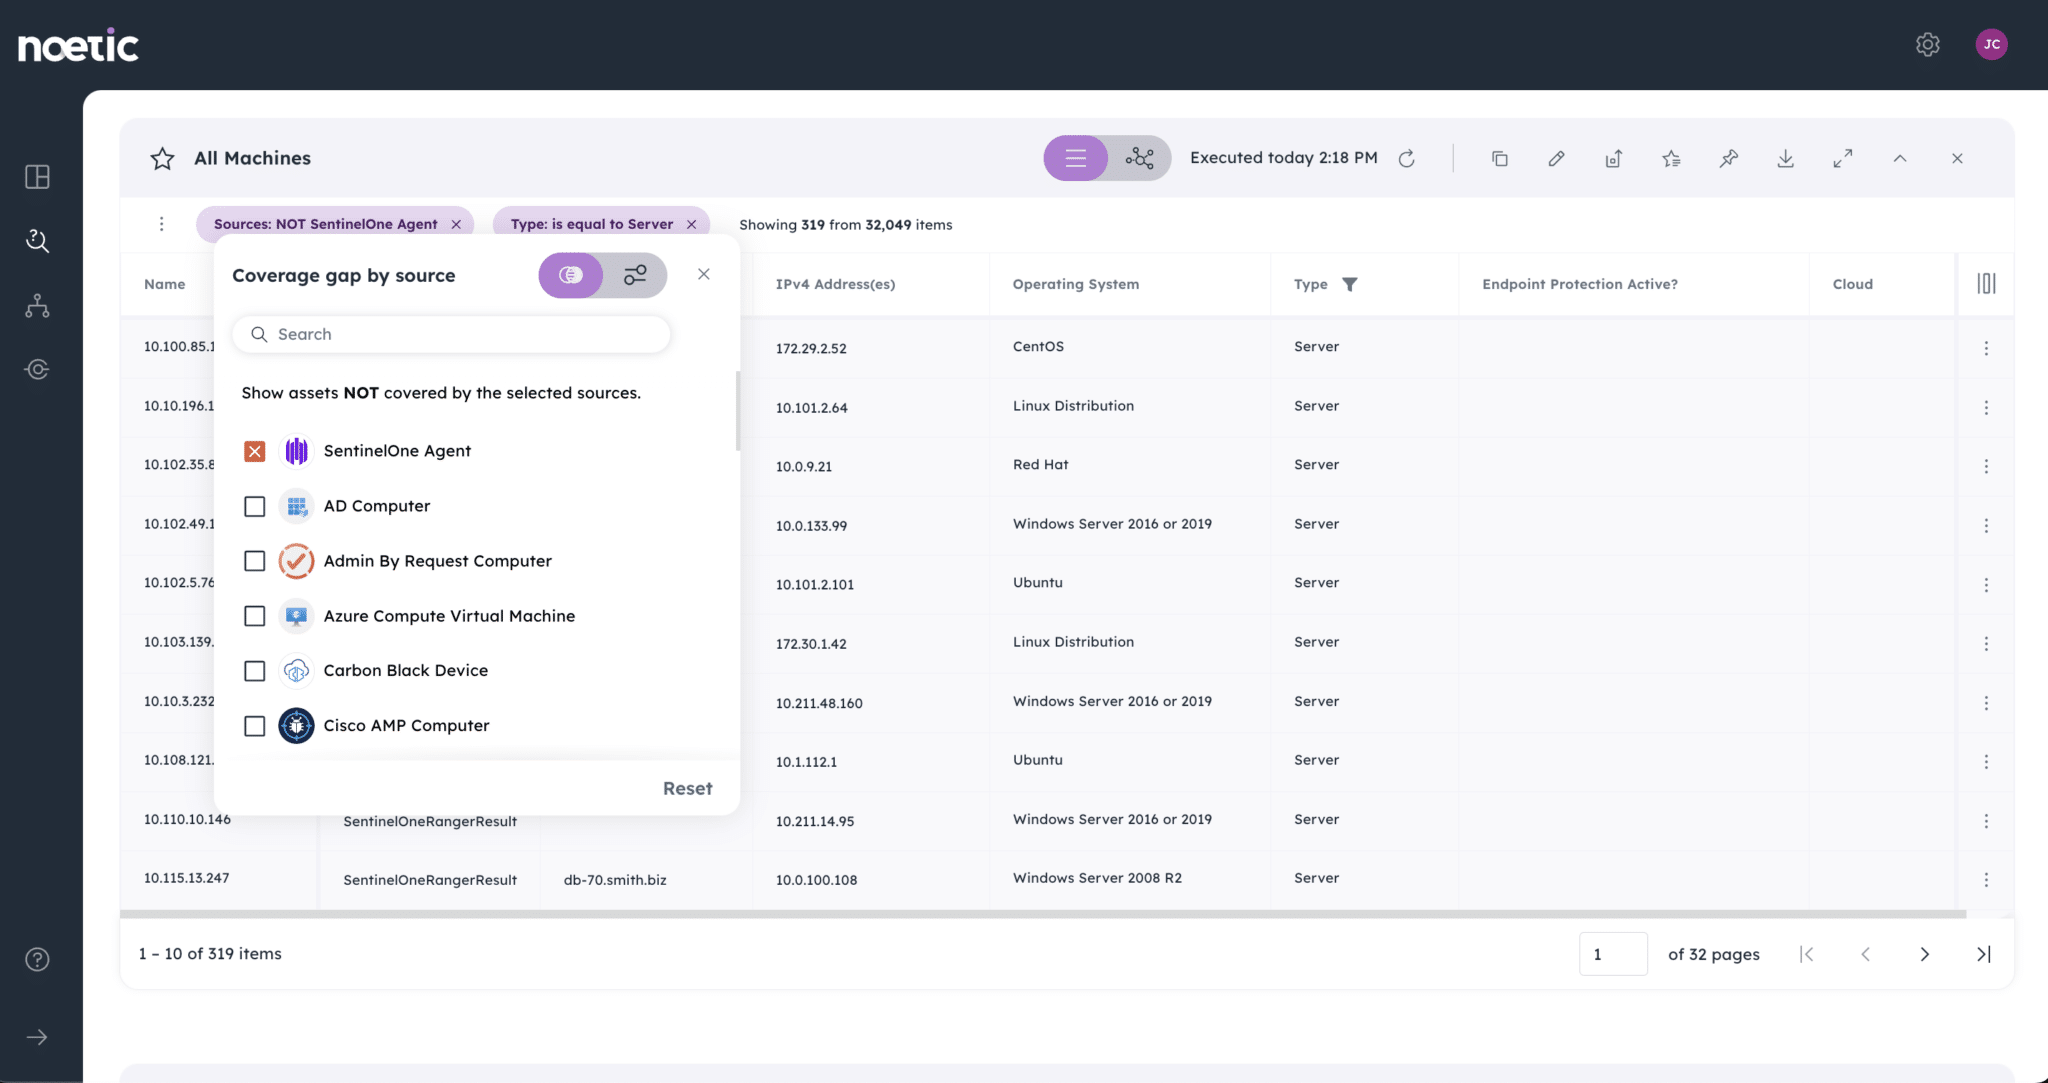 September 2023 updates to the Noetic platform include Data Insights. Security teams can filter and sort asset data according to any property including type, operating system, data source, and location— enabling users to quickly identify security posture hygiene issues such as missing security controls or unmanaged assets